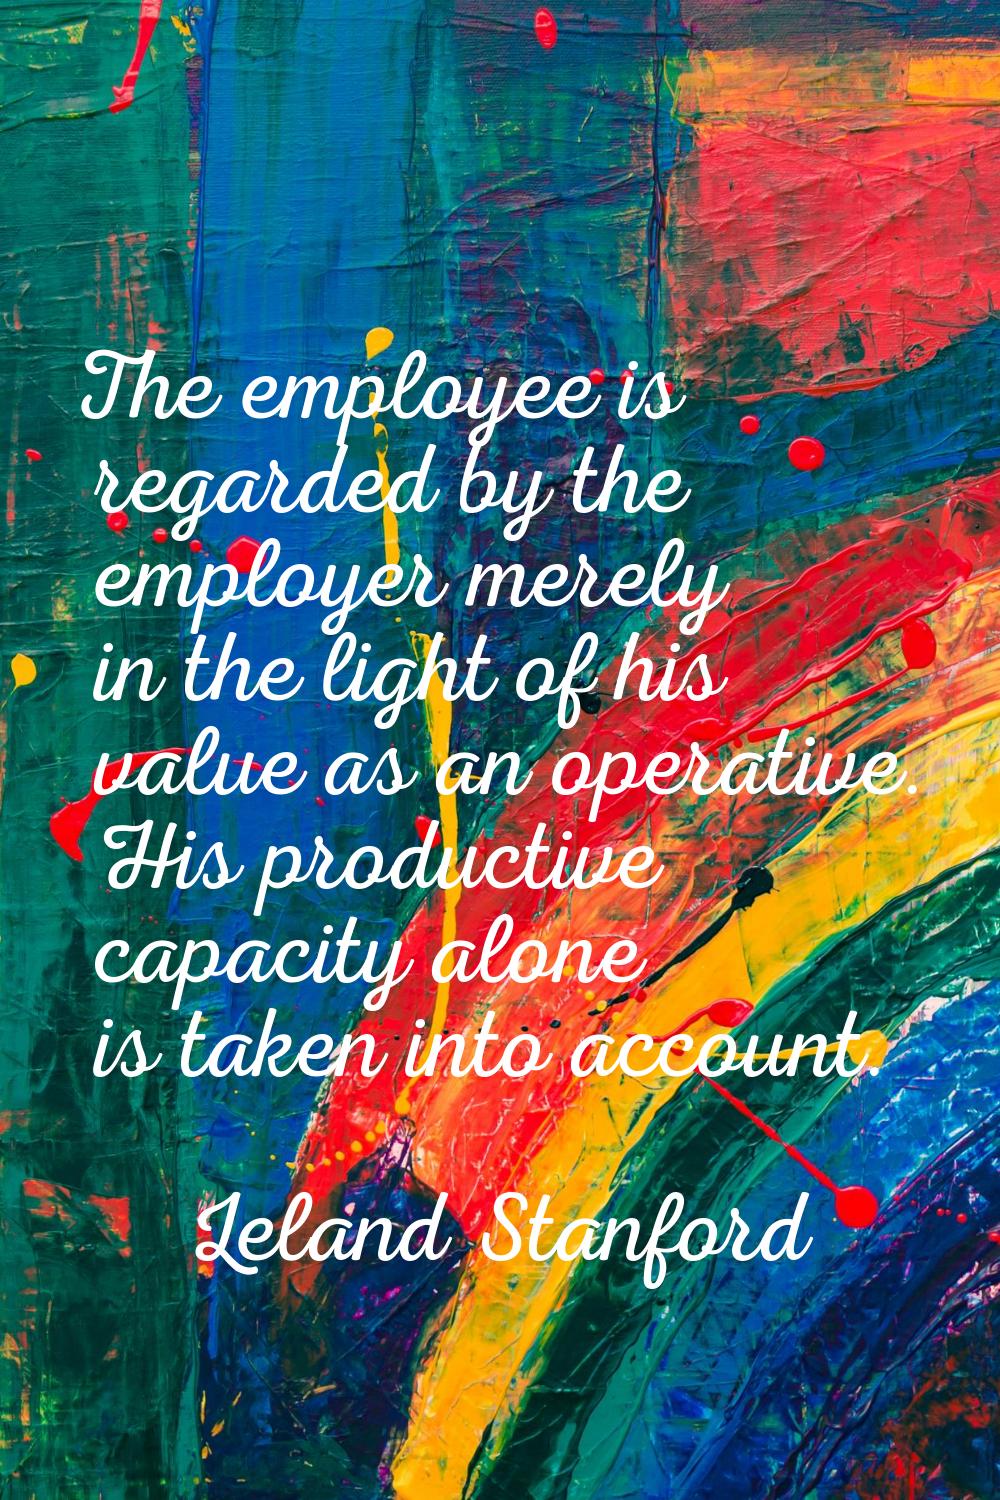 The employee is regarded by the employer merely in the light of his value as an operative. His prod